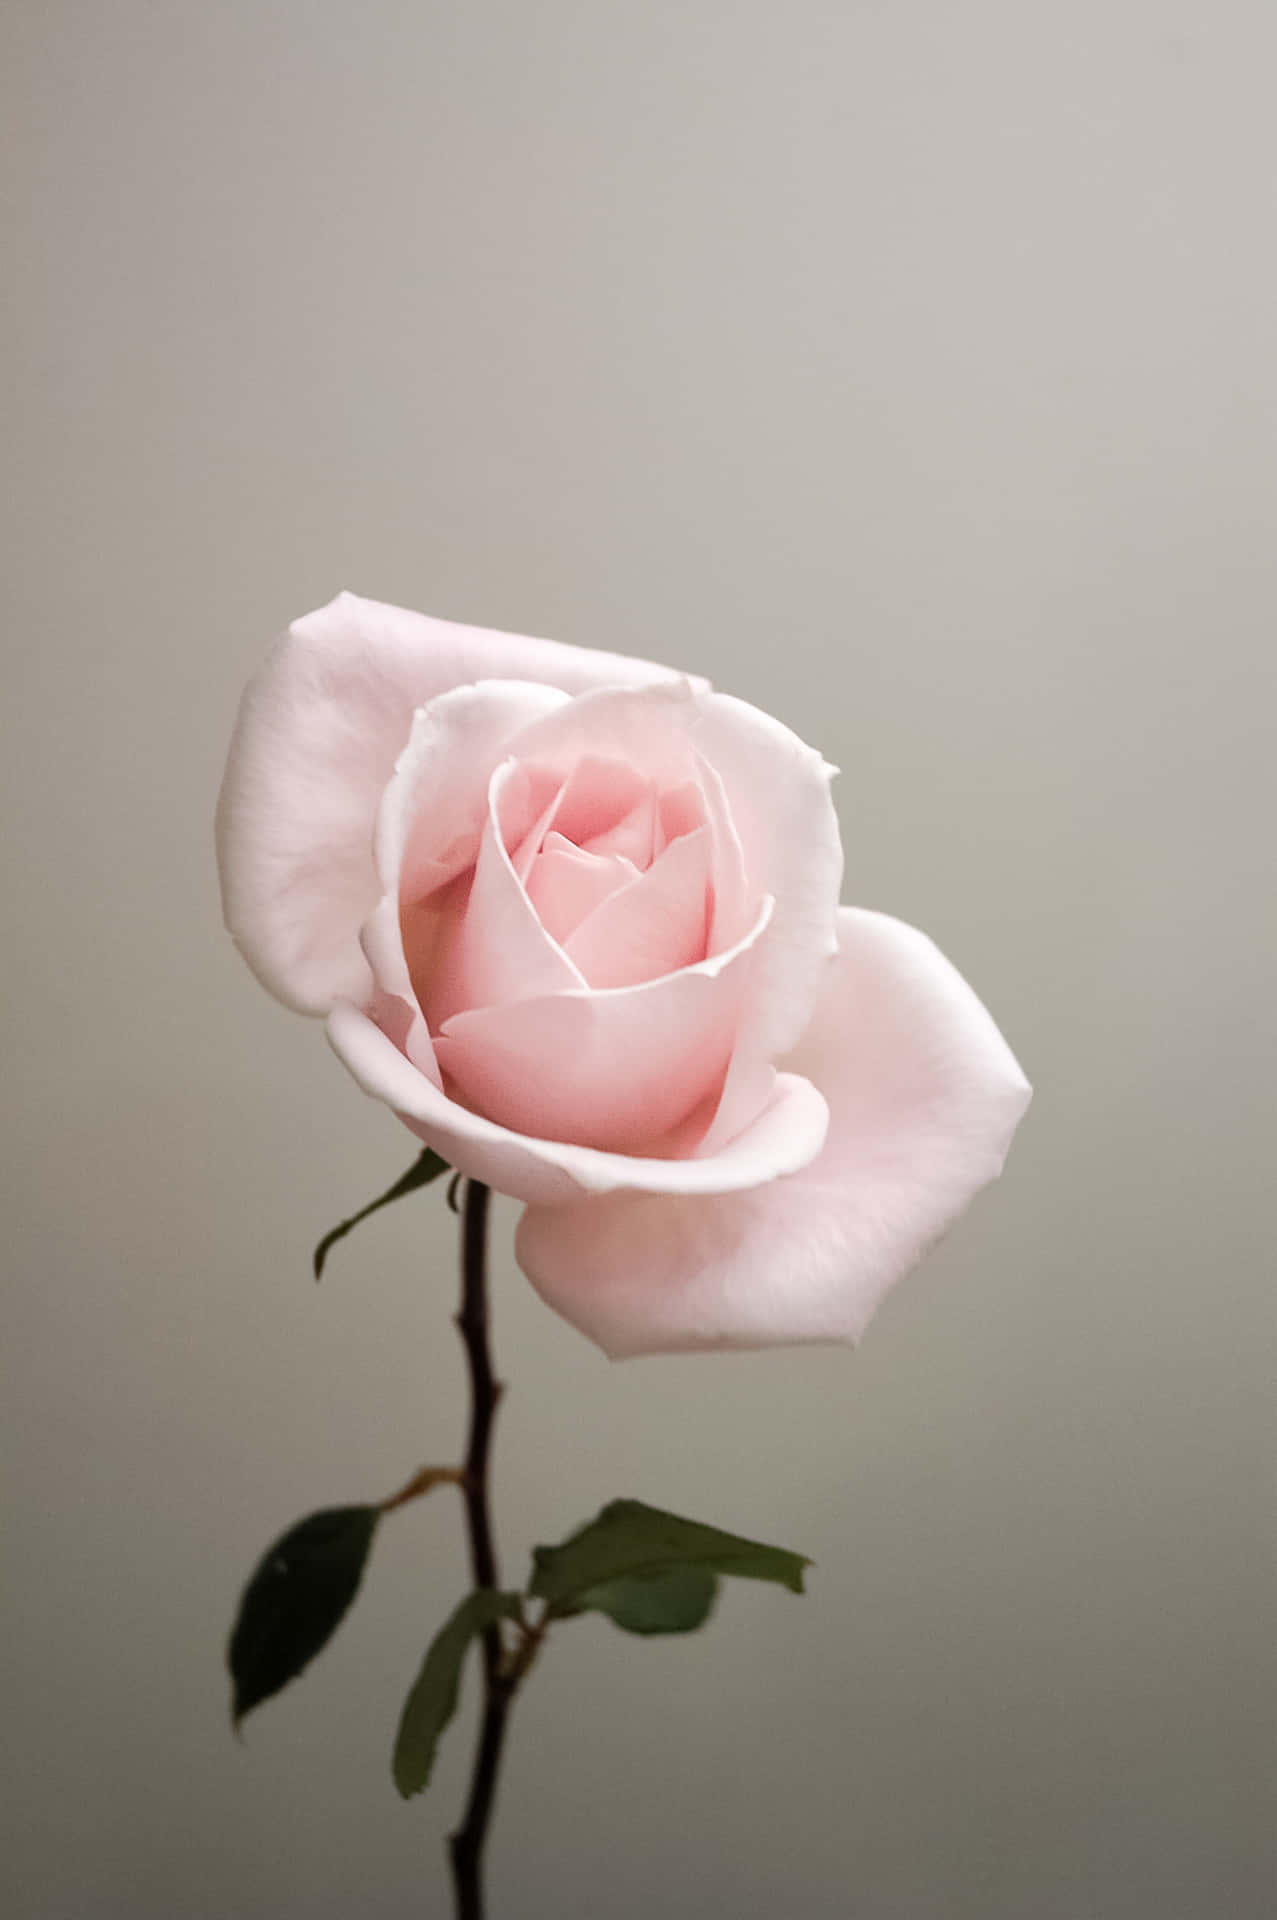 The beauty of the Cute Rose Wallpaper